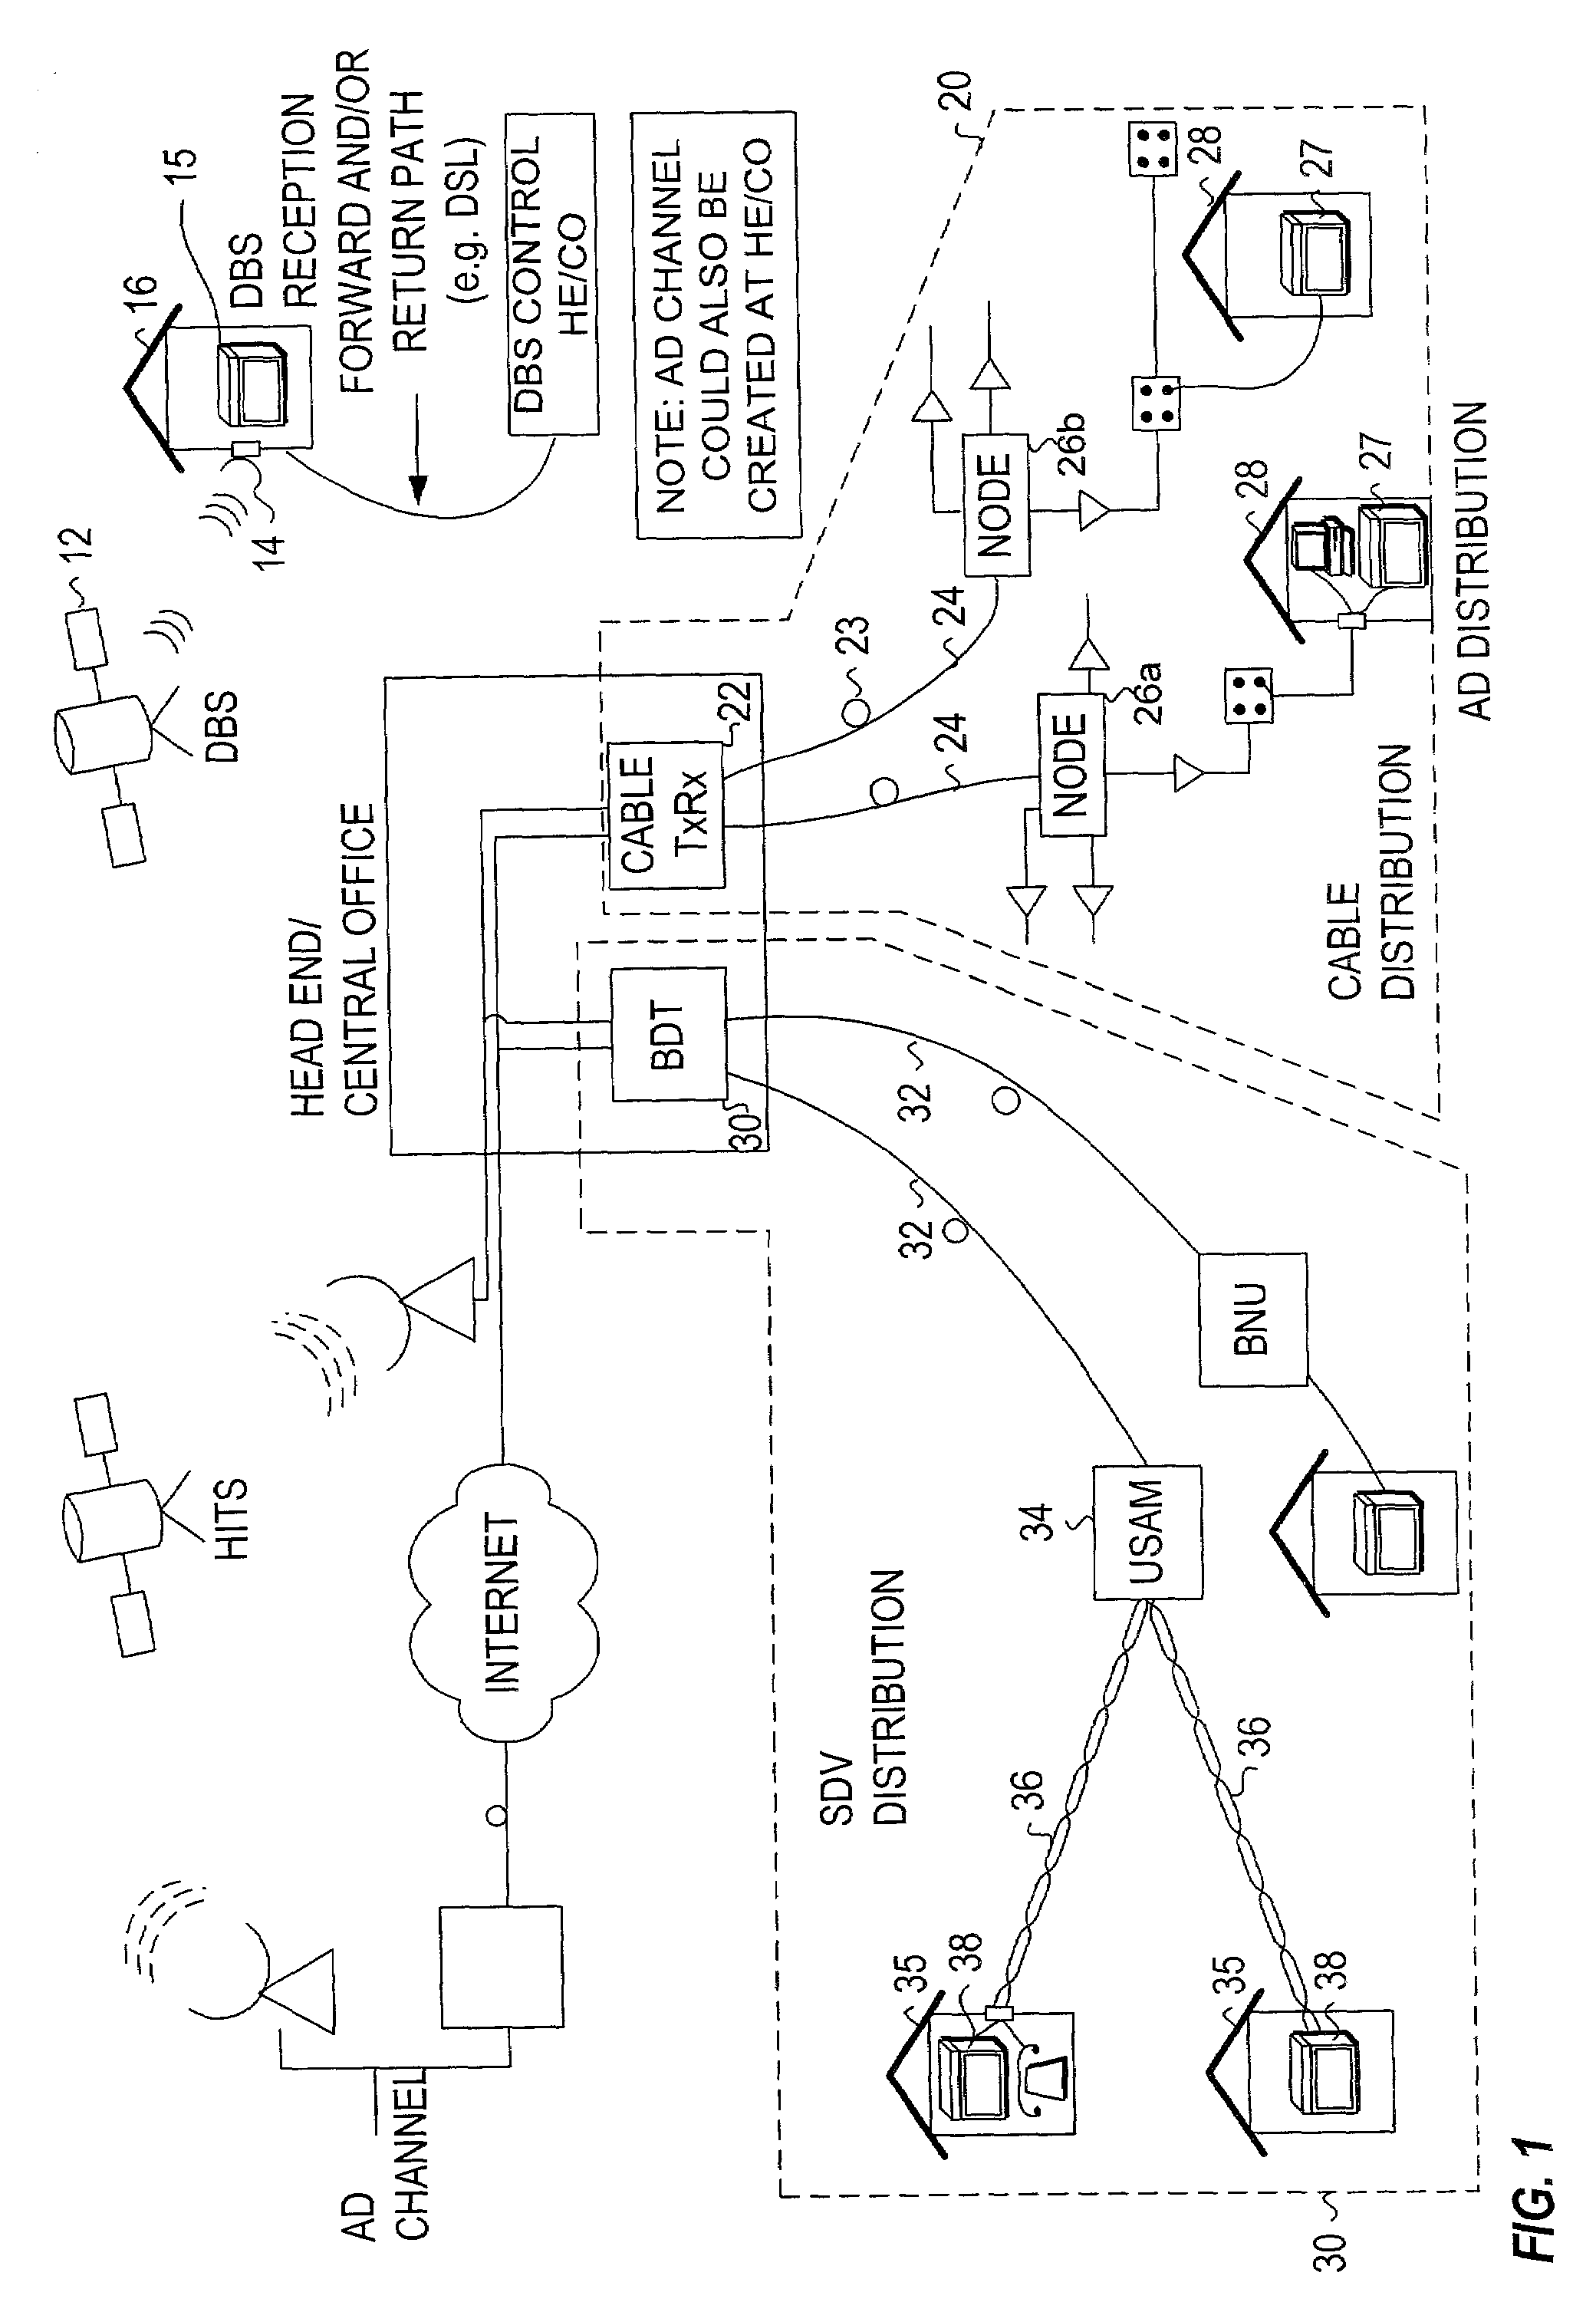 System and method for delivering statistically scheduled advertisements